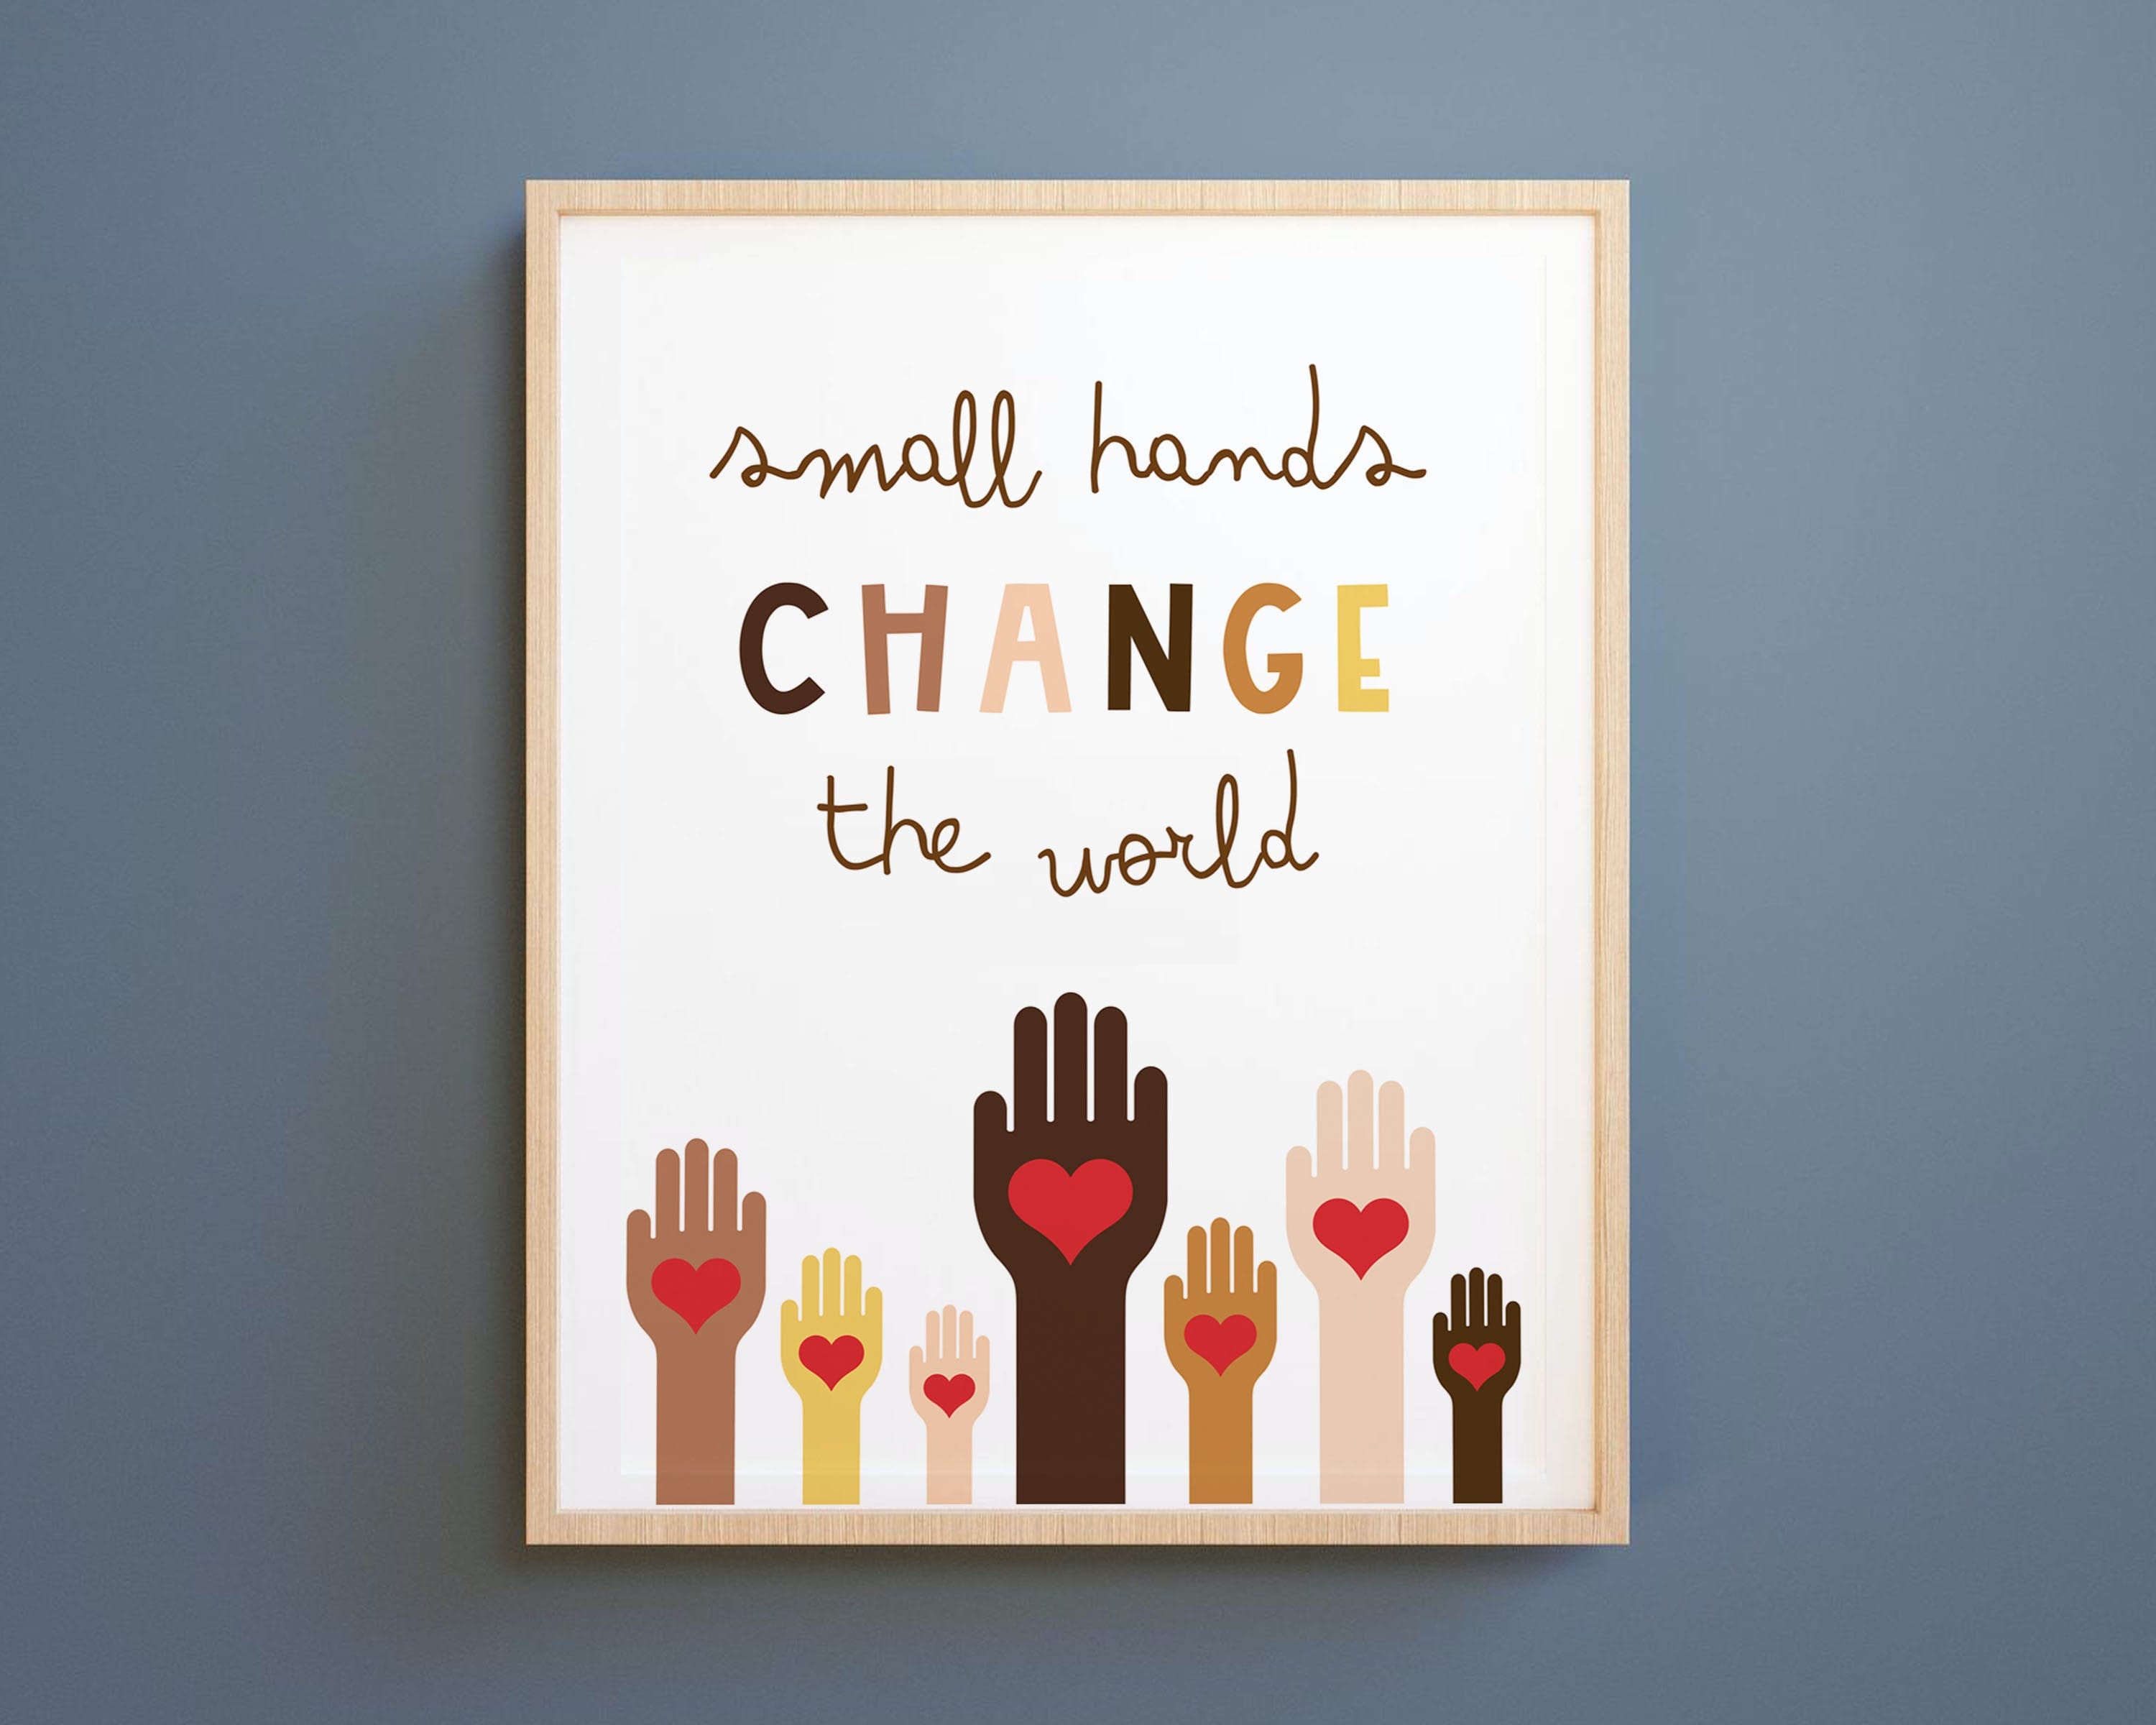 PRINT small Hands Change the World Archival Giclee Print Multicultural  Diversity Art Teacher Gift Classroom Decor FREE SHIPPING 